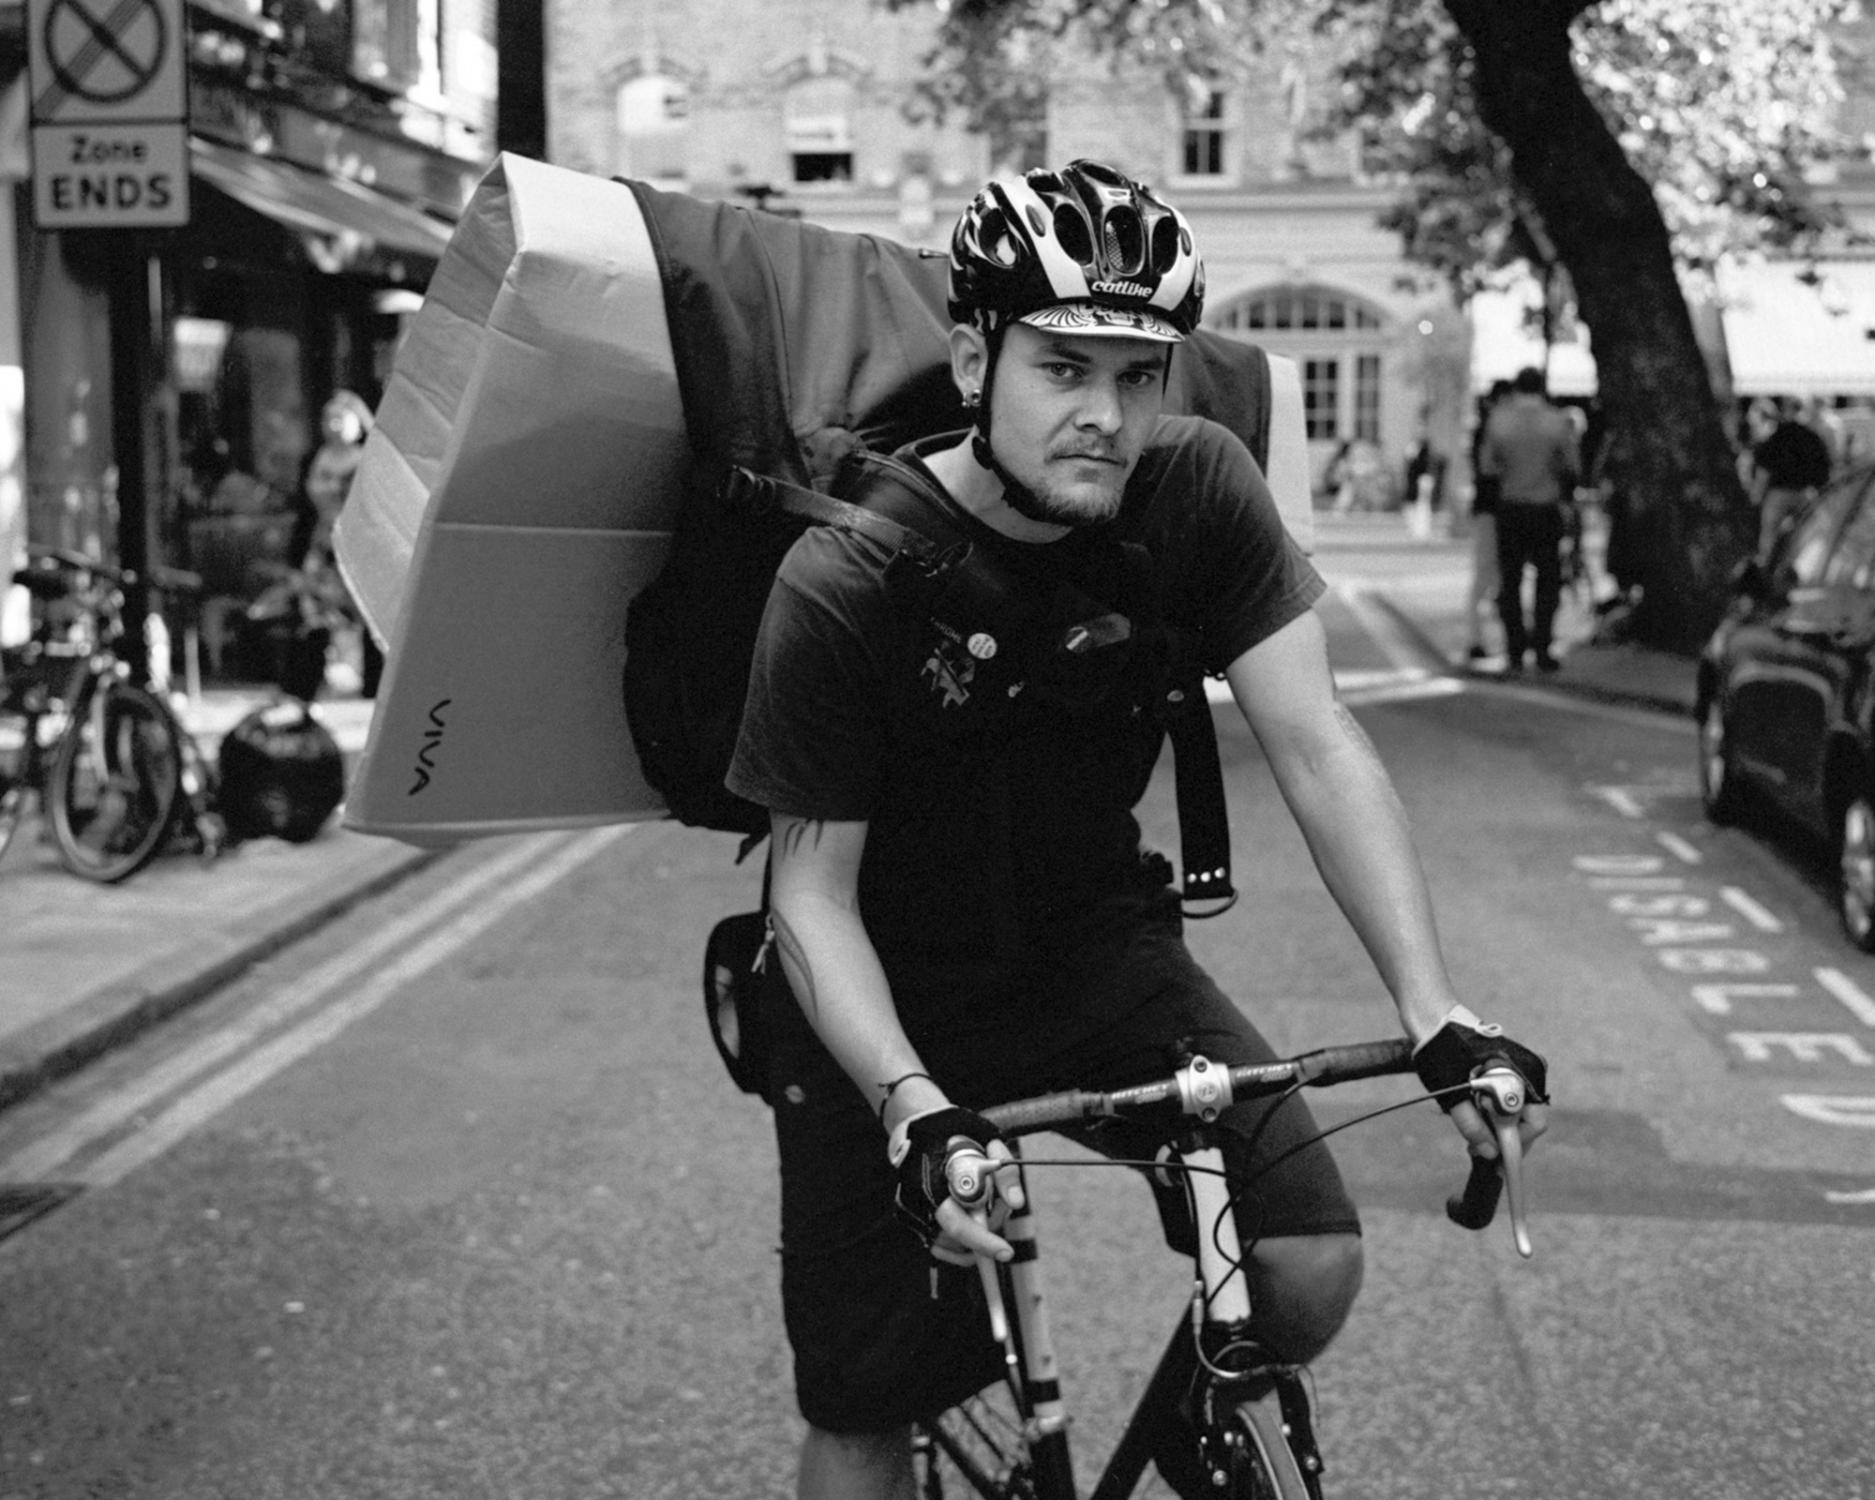 The Circuit. London Bicycle Messengers 2009-2015